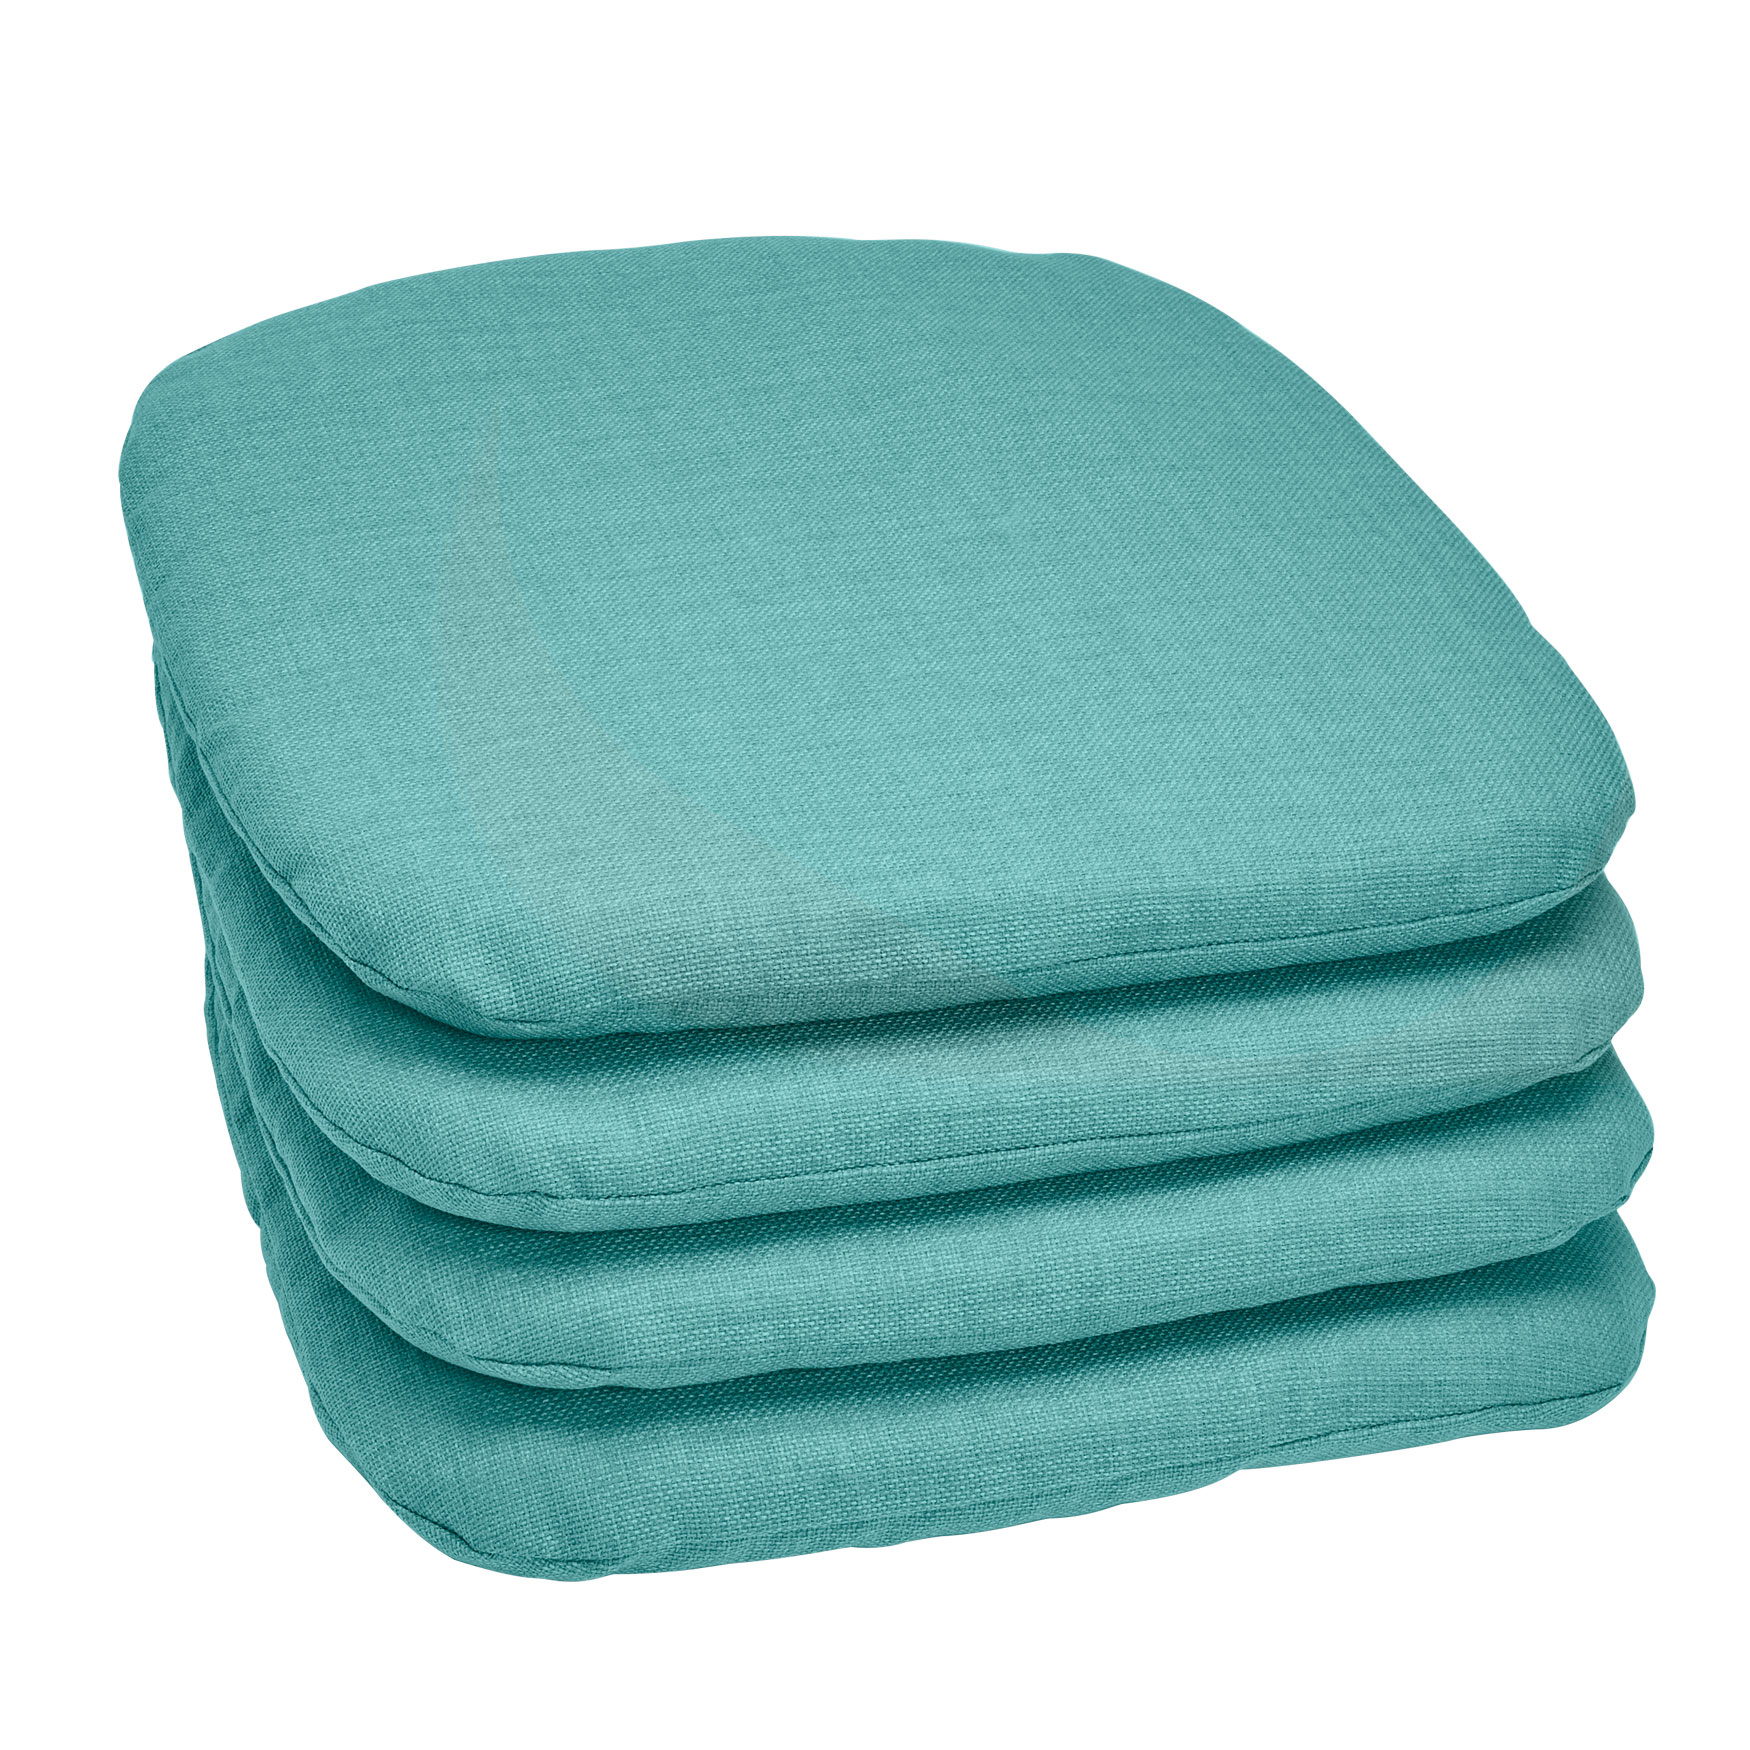 Set of 4 Stacking Chair Pads, 